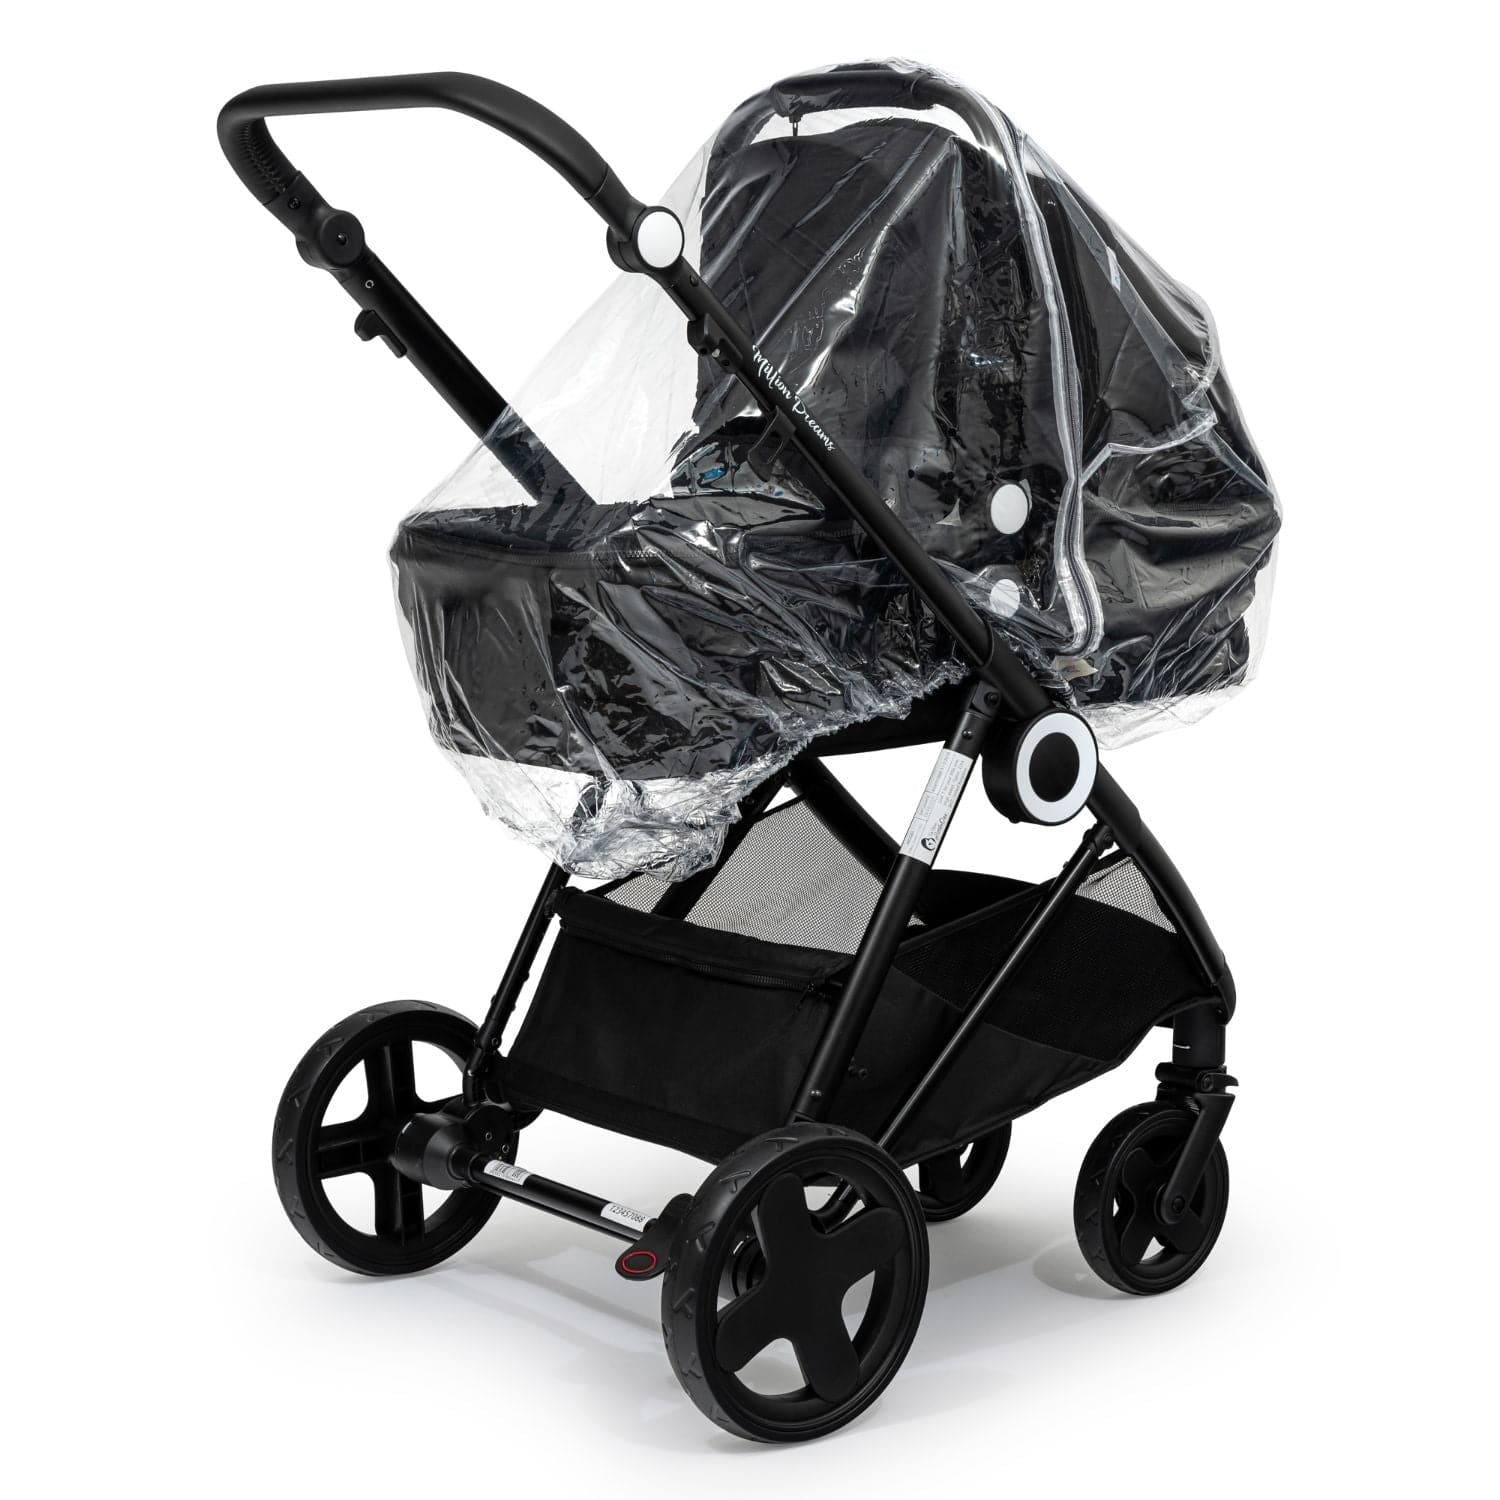 Carrycot Raincover Compatible With BabySun - Fits All Models - For Your Little One